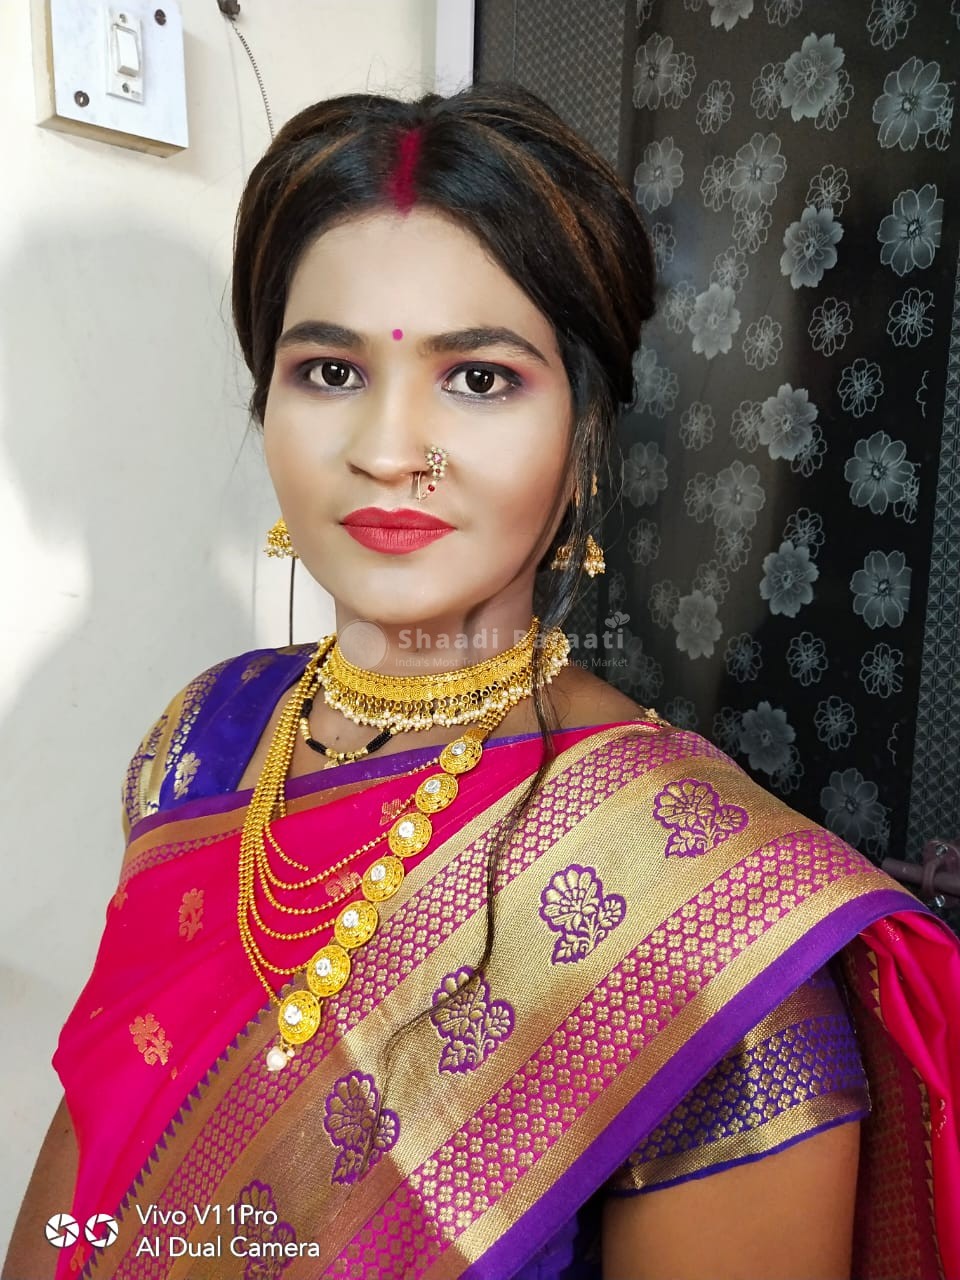 Sayali Makeup & Hair Artist - This Peshwai Look of my Bride has all my  heart 💖 ==================================== Makeup & Hairstyle by  @theinstaura For HD Bridal Bookings Call or Whatsapp us on +